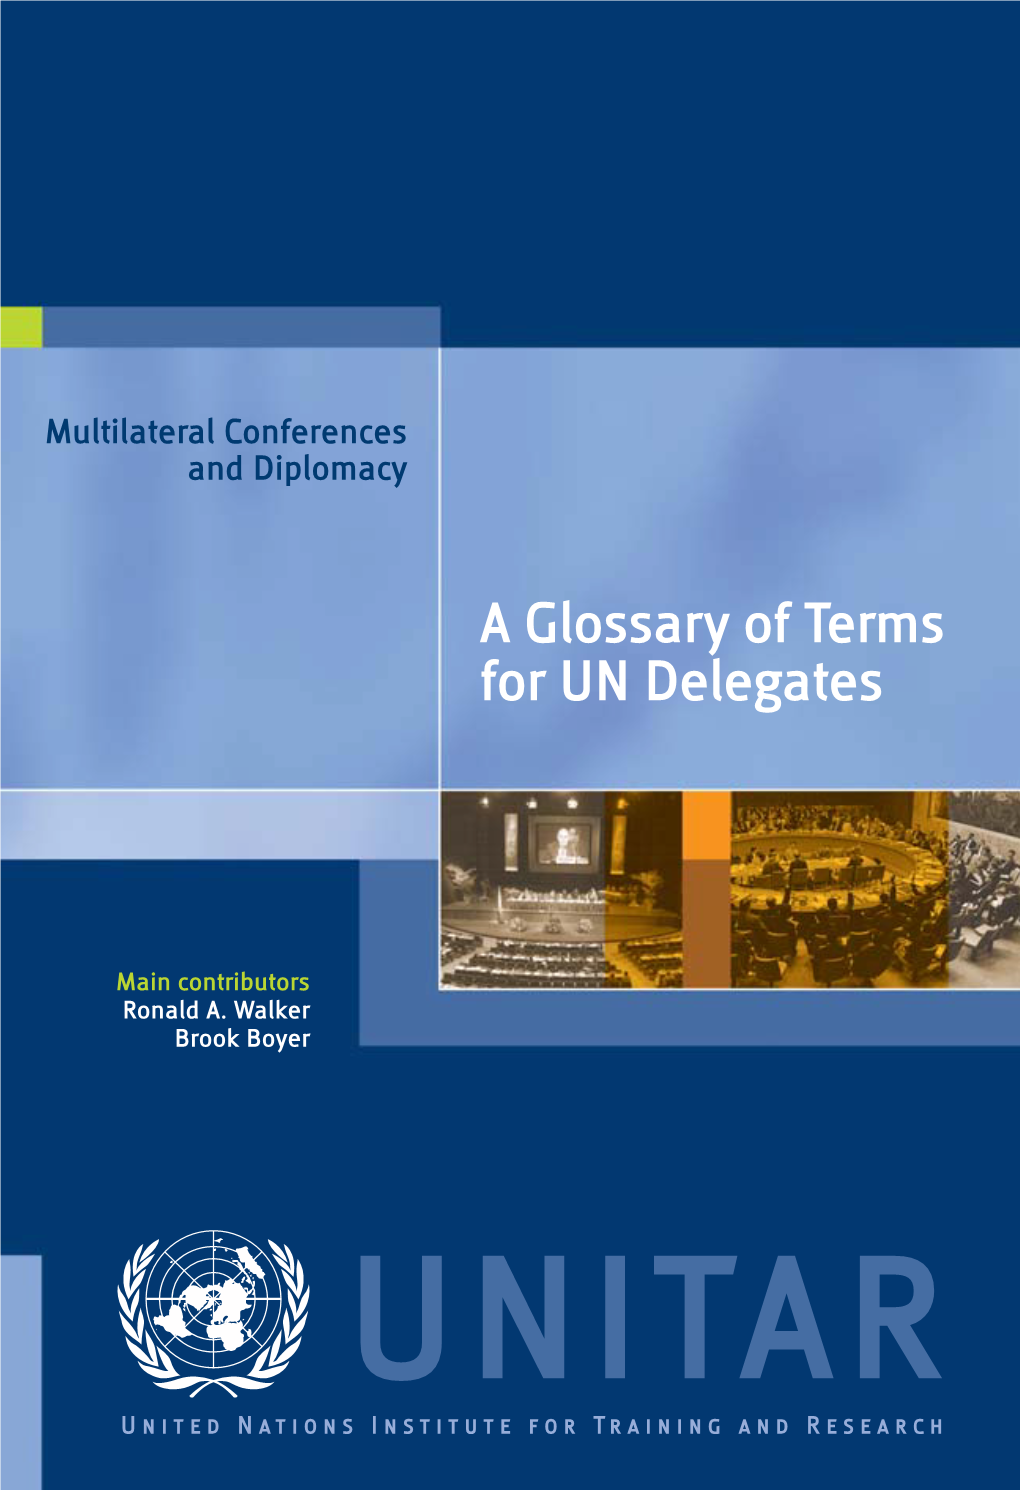 A Glossary of Terms for UN Delegates